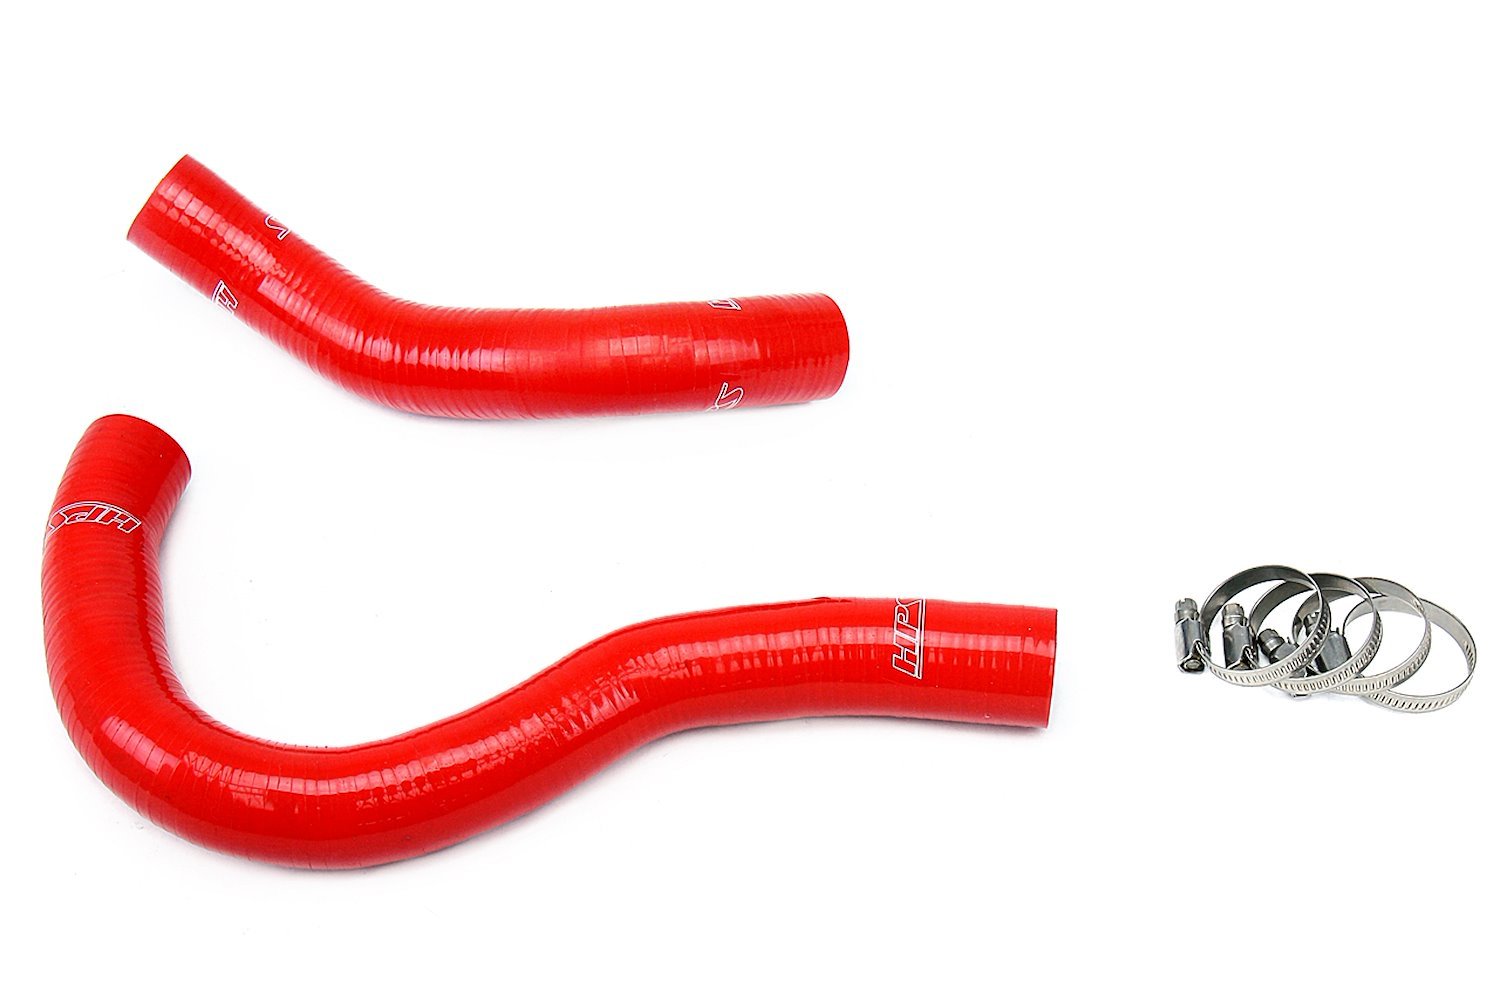 57-1001-RED Radiator Hose Kit, High-Temp 3-Ply Reinforced Silicone, Replace OEM Rubber Radiator Coolant Hoses